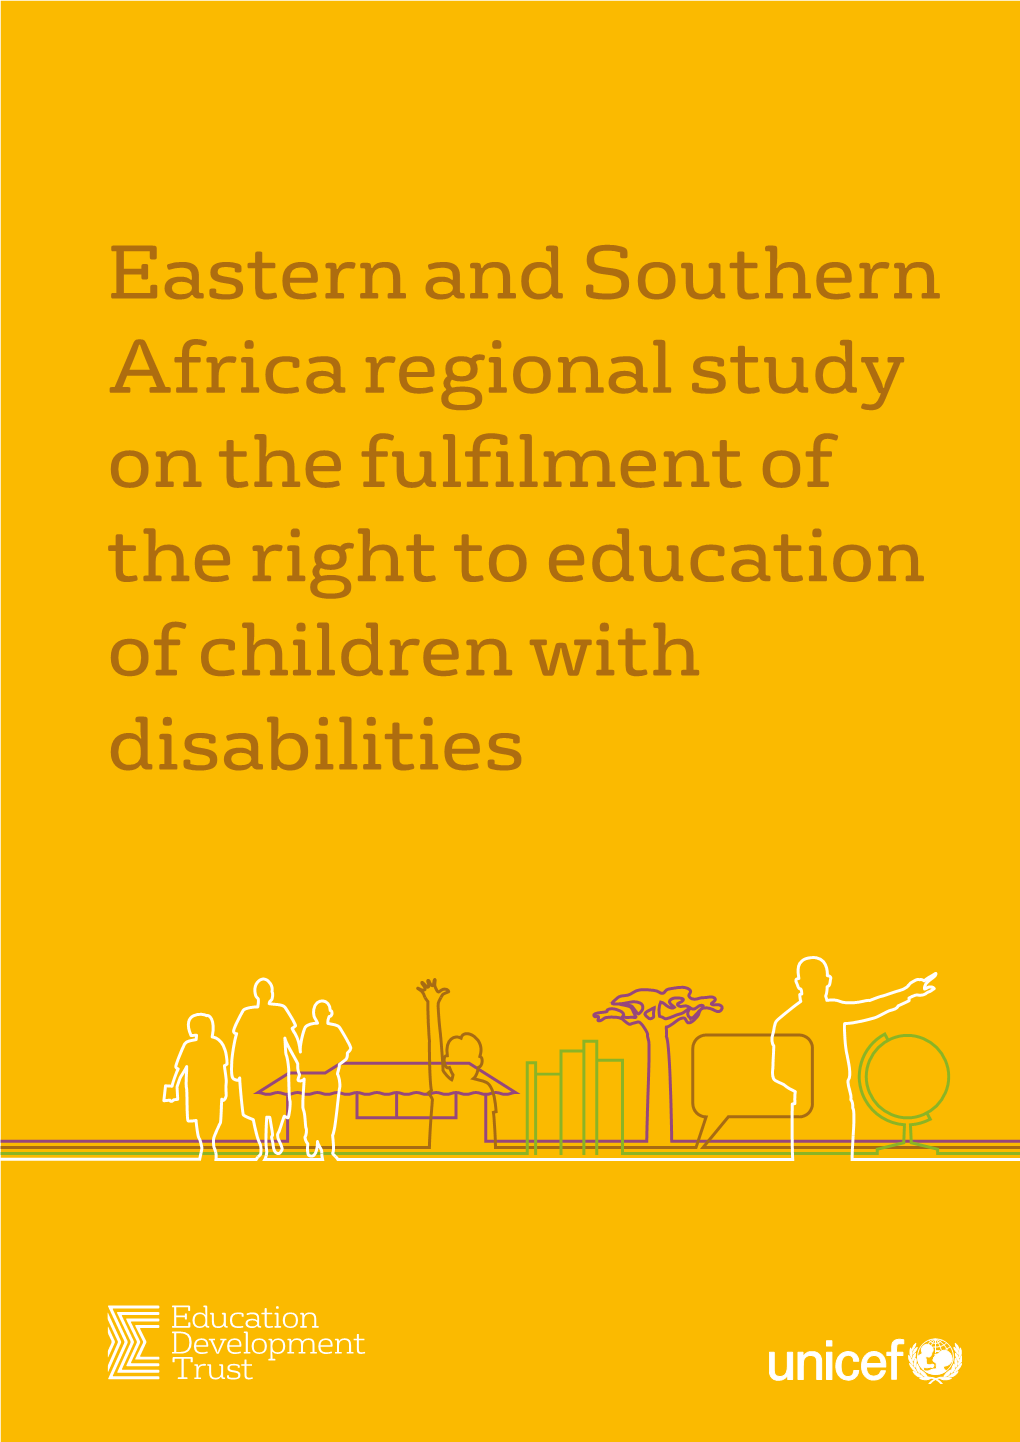 Eastern and Southern Africa Regional Study on the Fulfilment of the Right to Education of Children with Disabilities